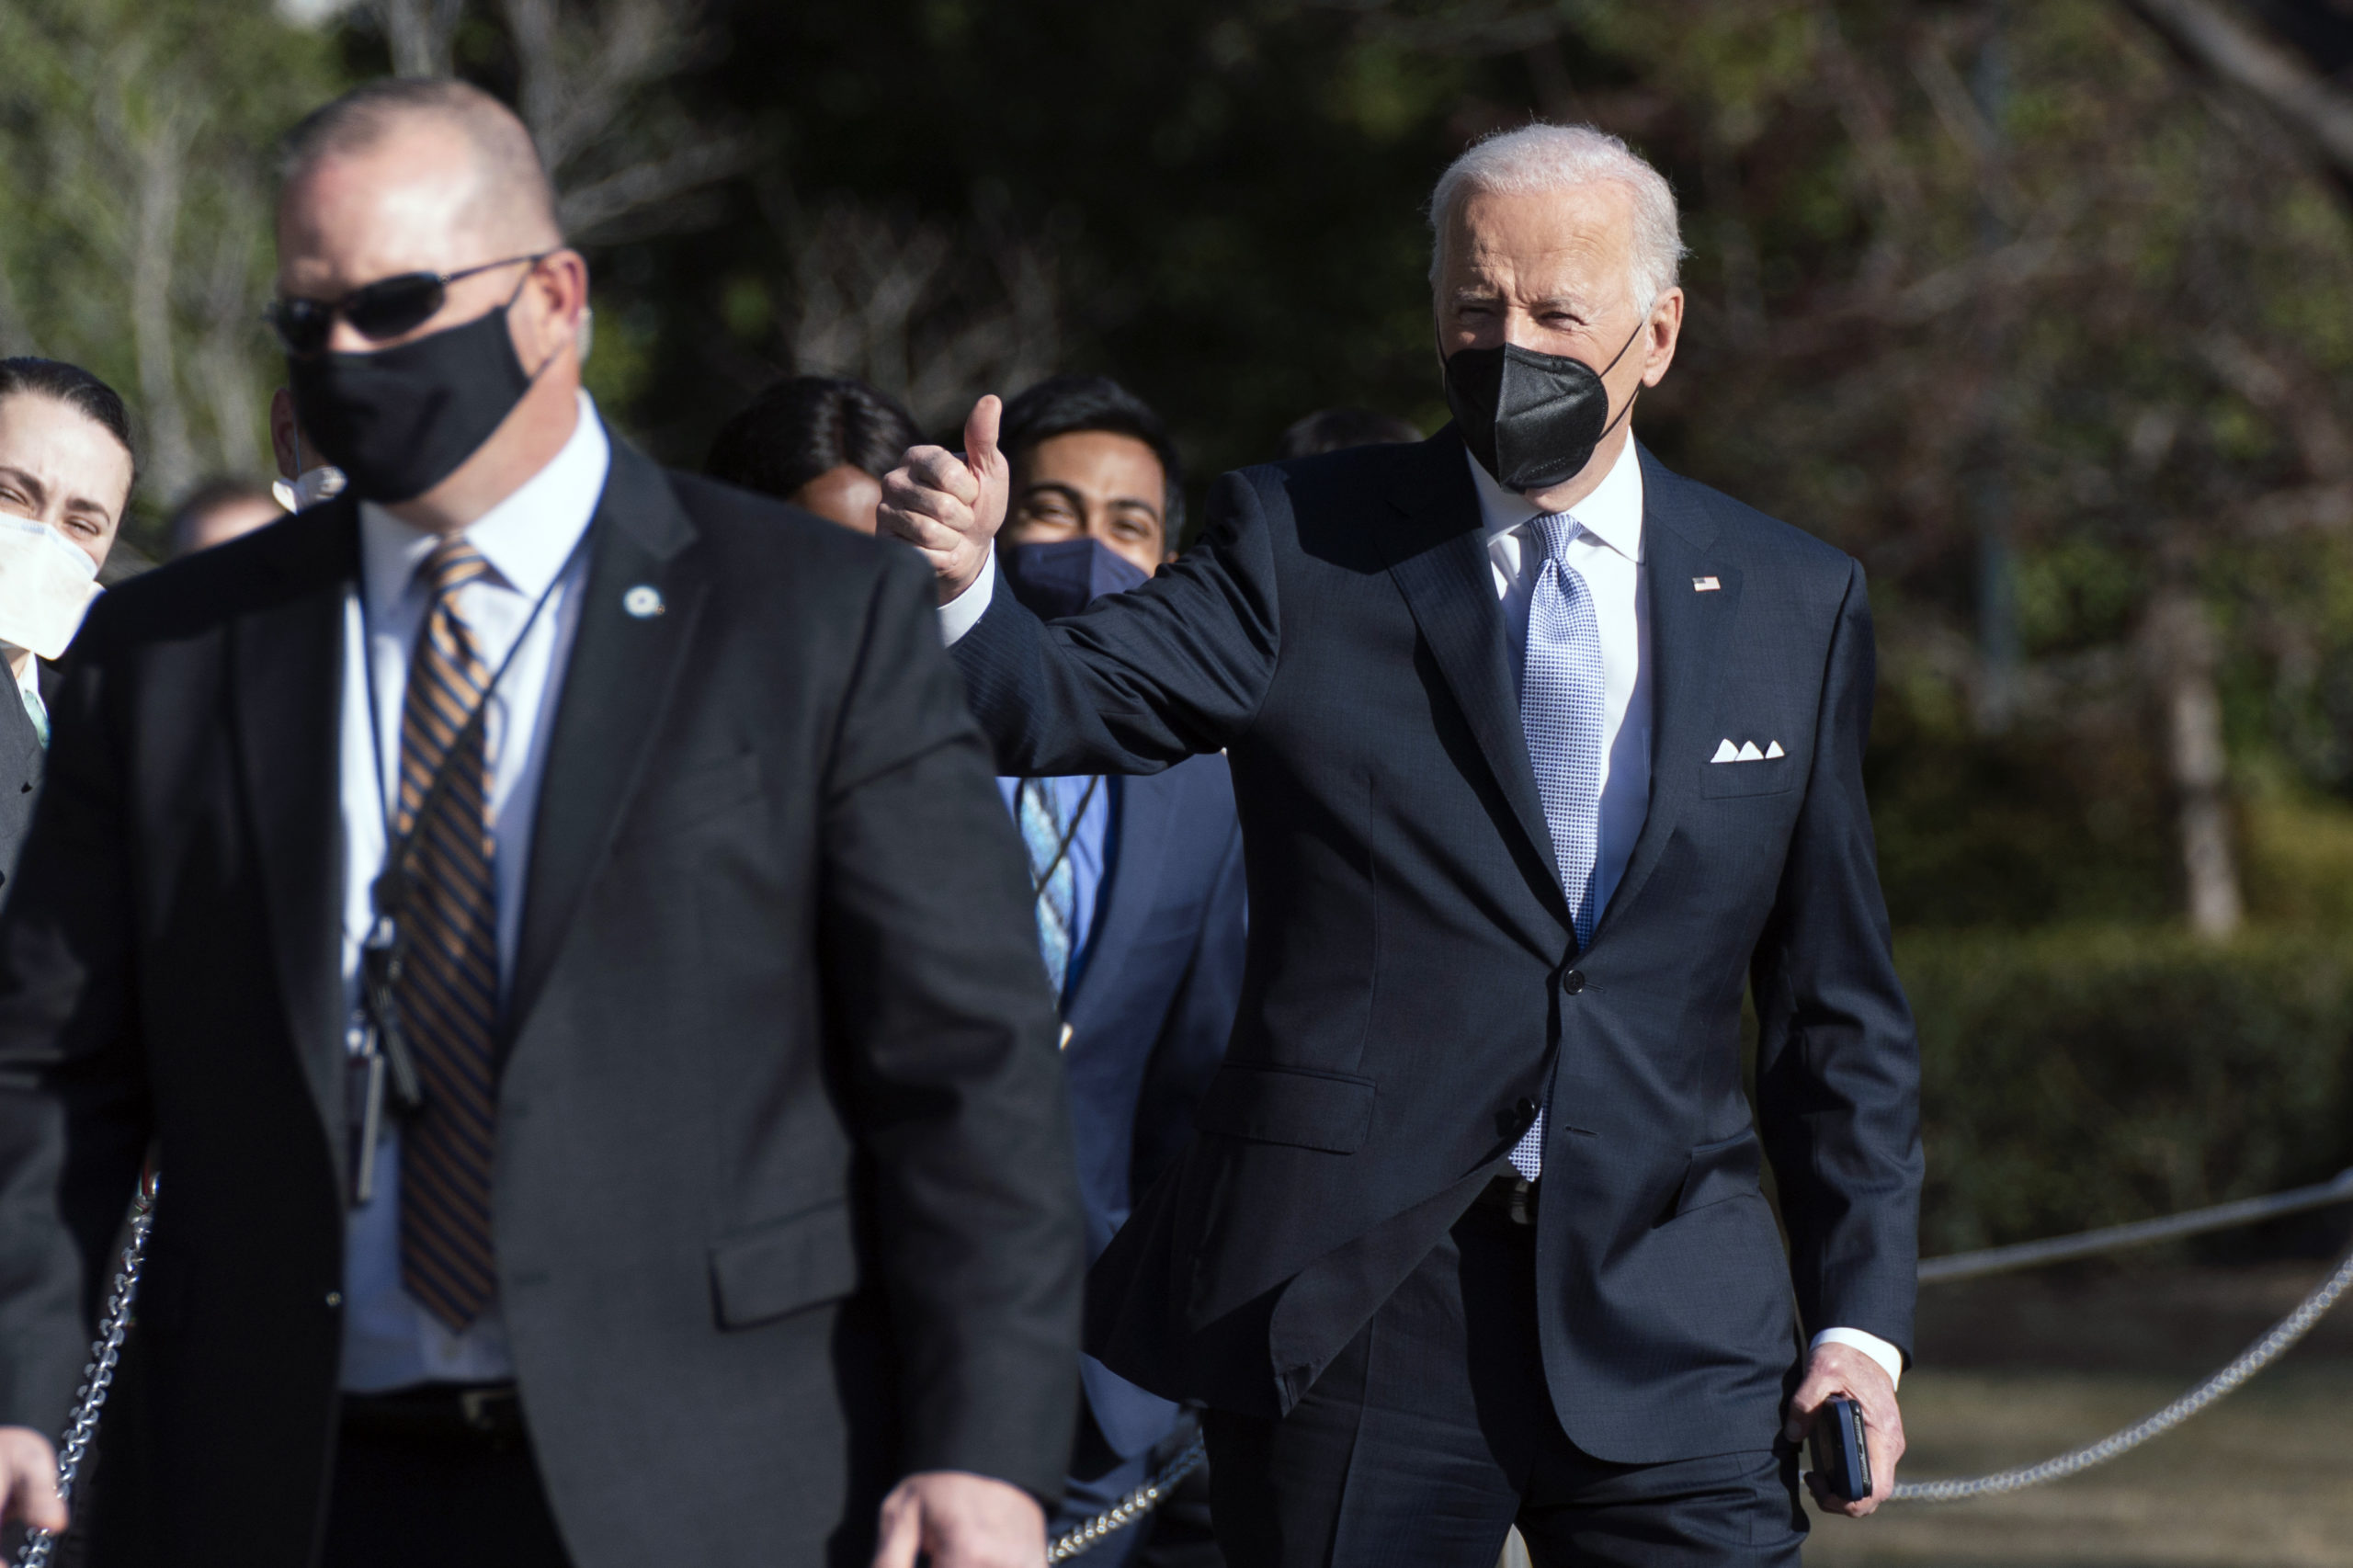 President Joe Biden gives a thumbs up as he walks to board Marine One on the South Lawn of the Whit...